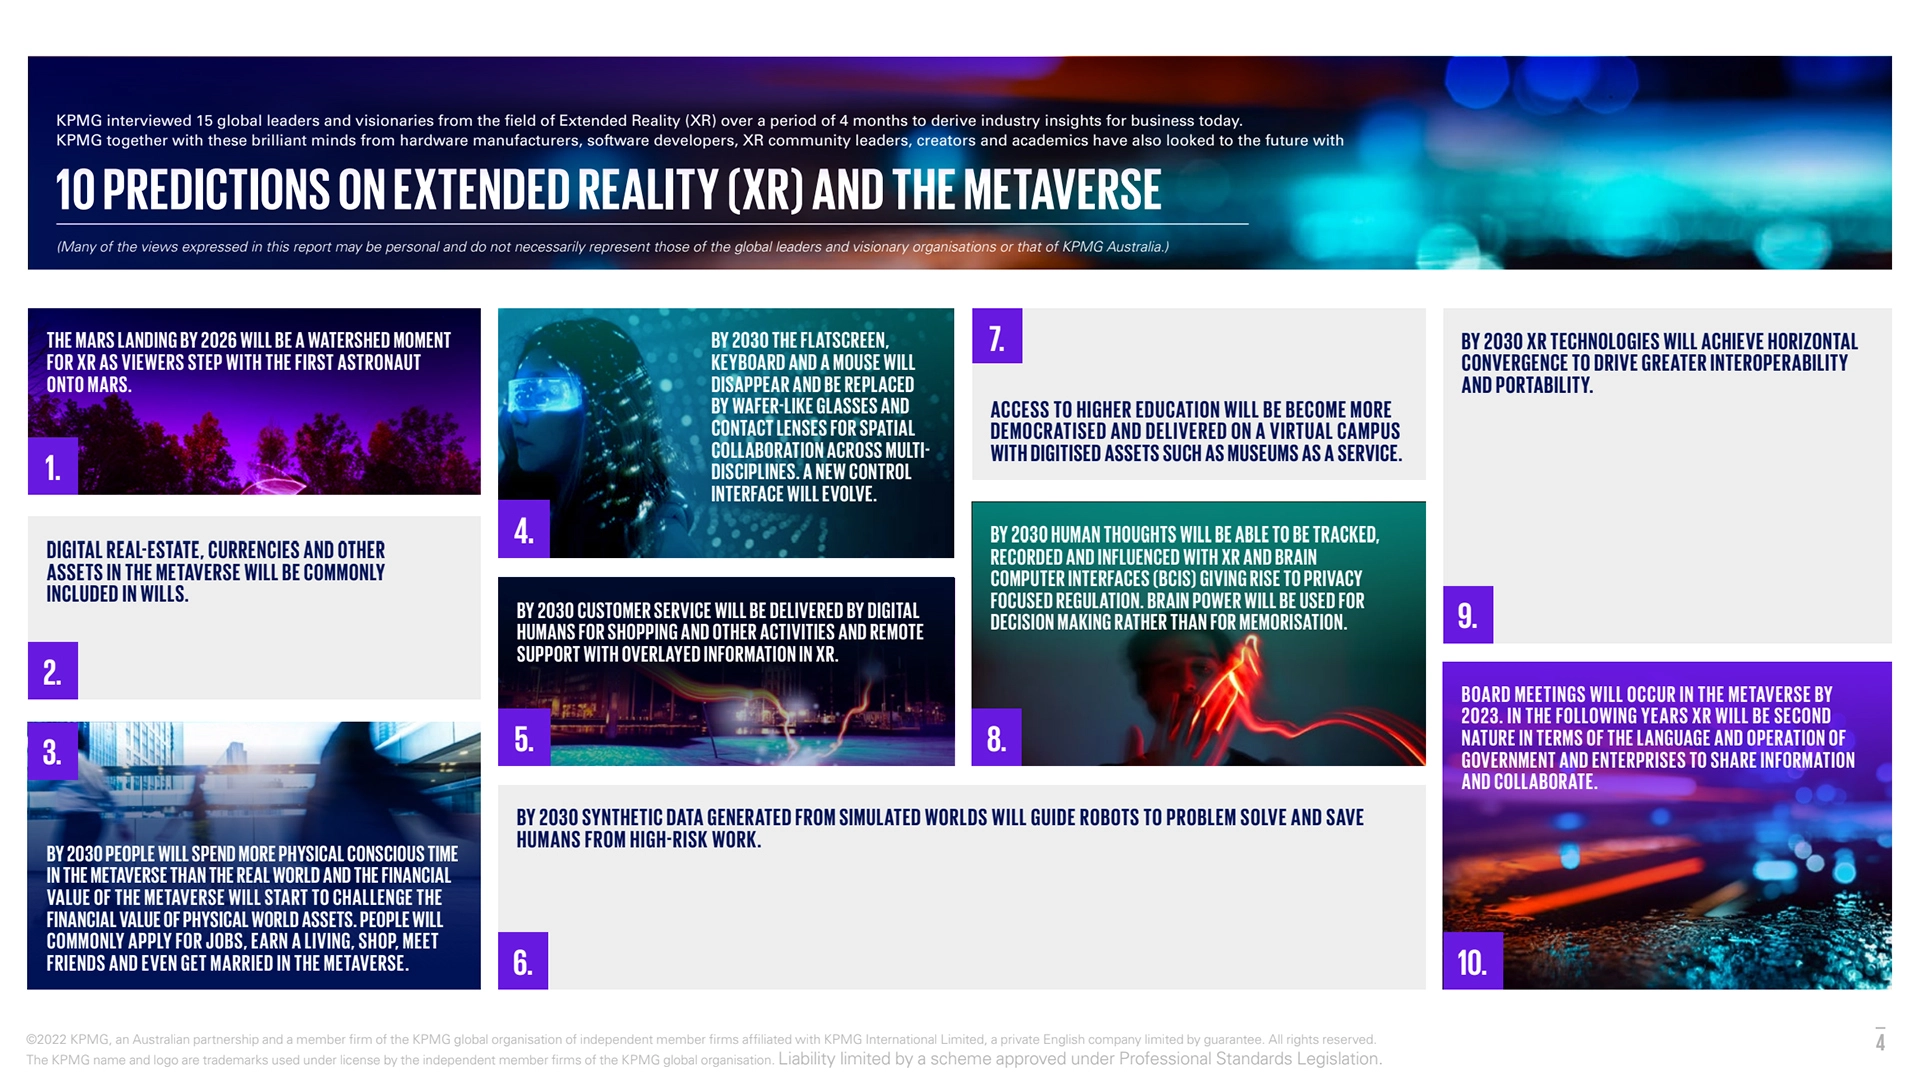 Whitepaper KPMG: “The future of Metaverse and Extended Reality” -10 Vorhersagen